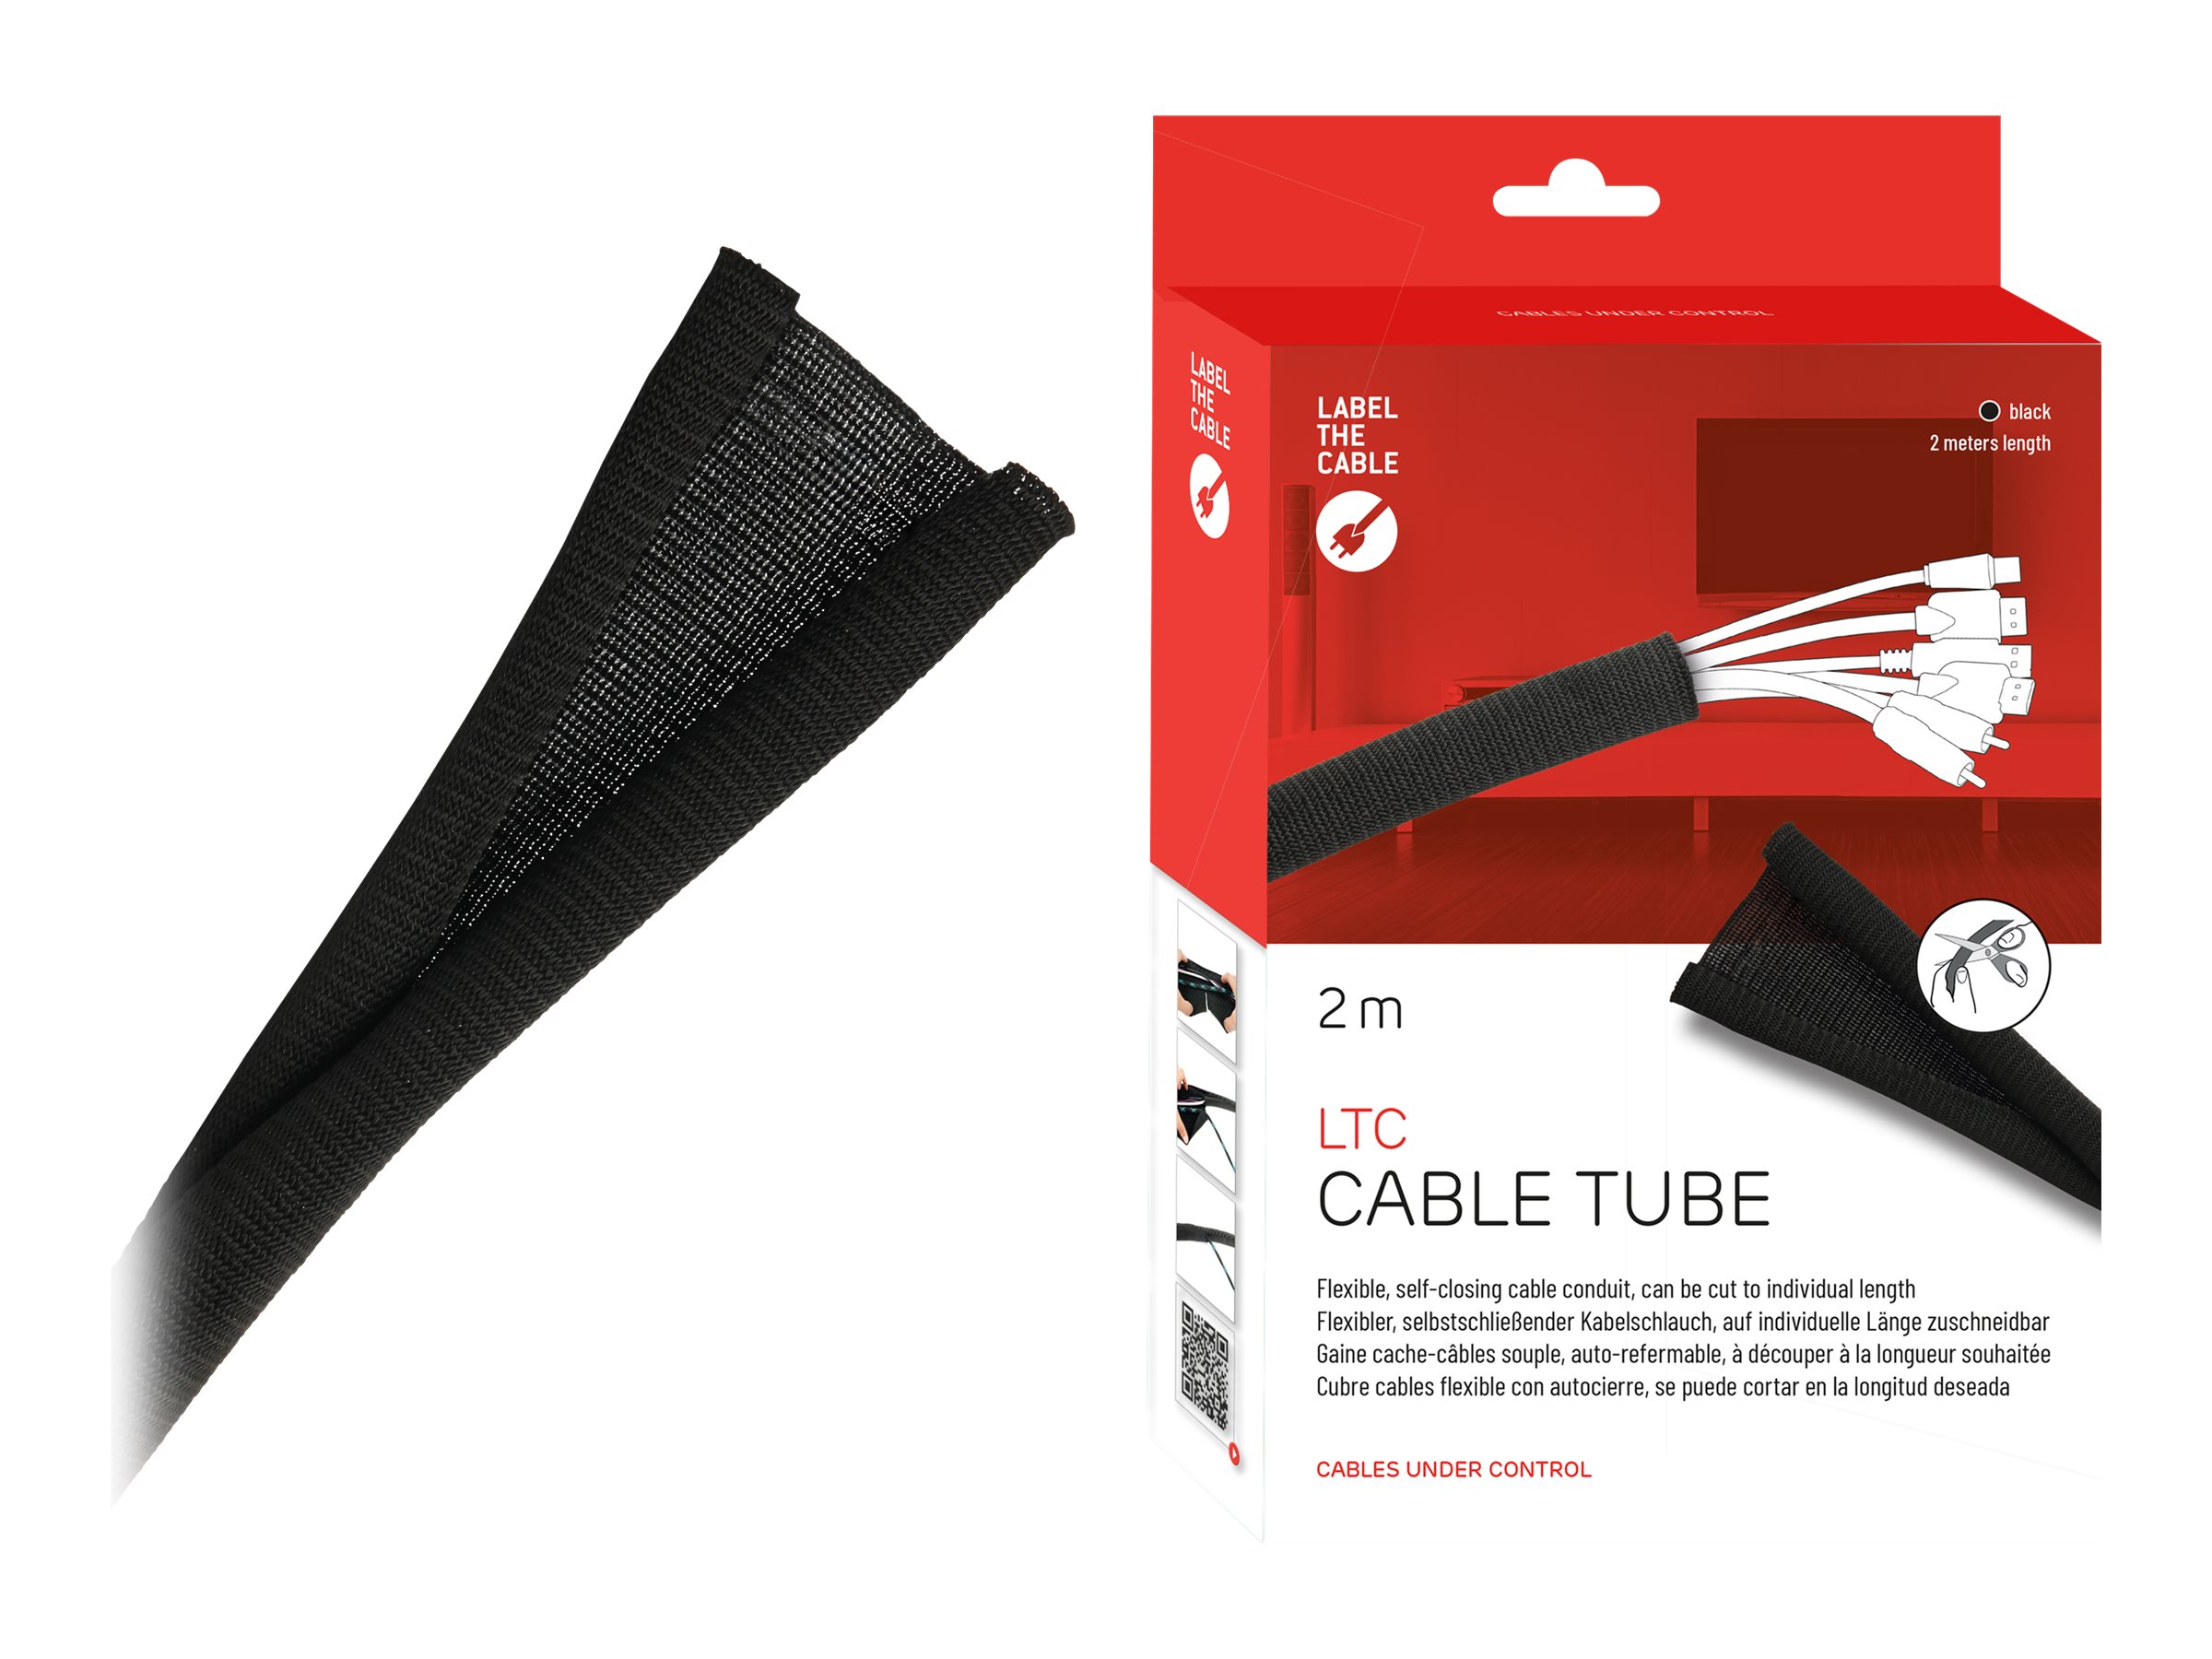 Label-the-cable LTC CABLE TUBE - Kabelschlauch - 2 m - Schwarz